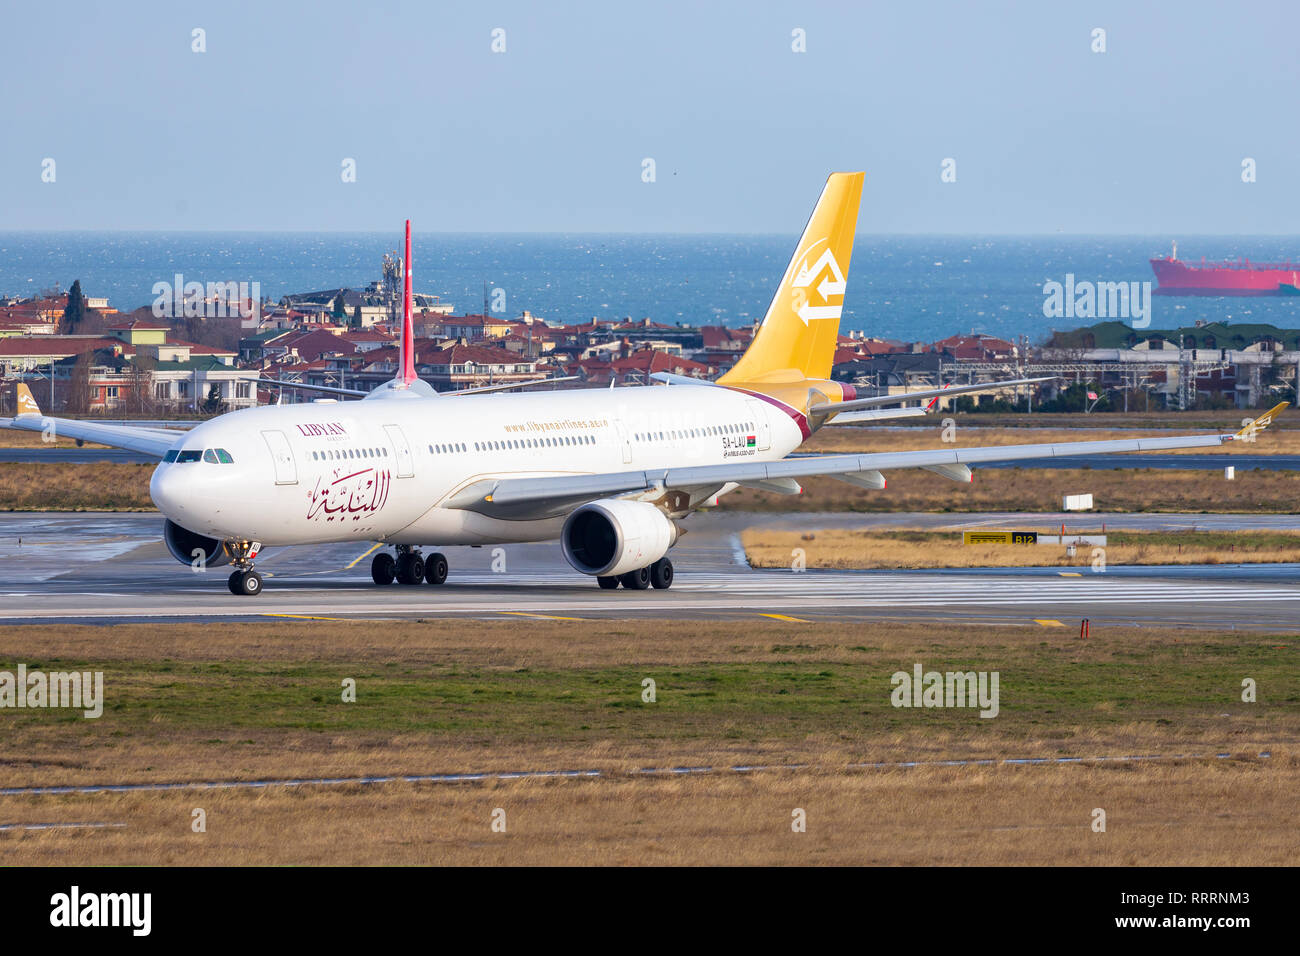 Istanbul/Turkey, February 12 2019: Libyan a330 at Istanbul new Airport Stock Photo